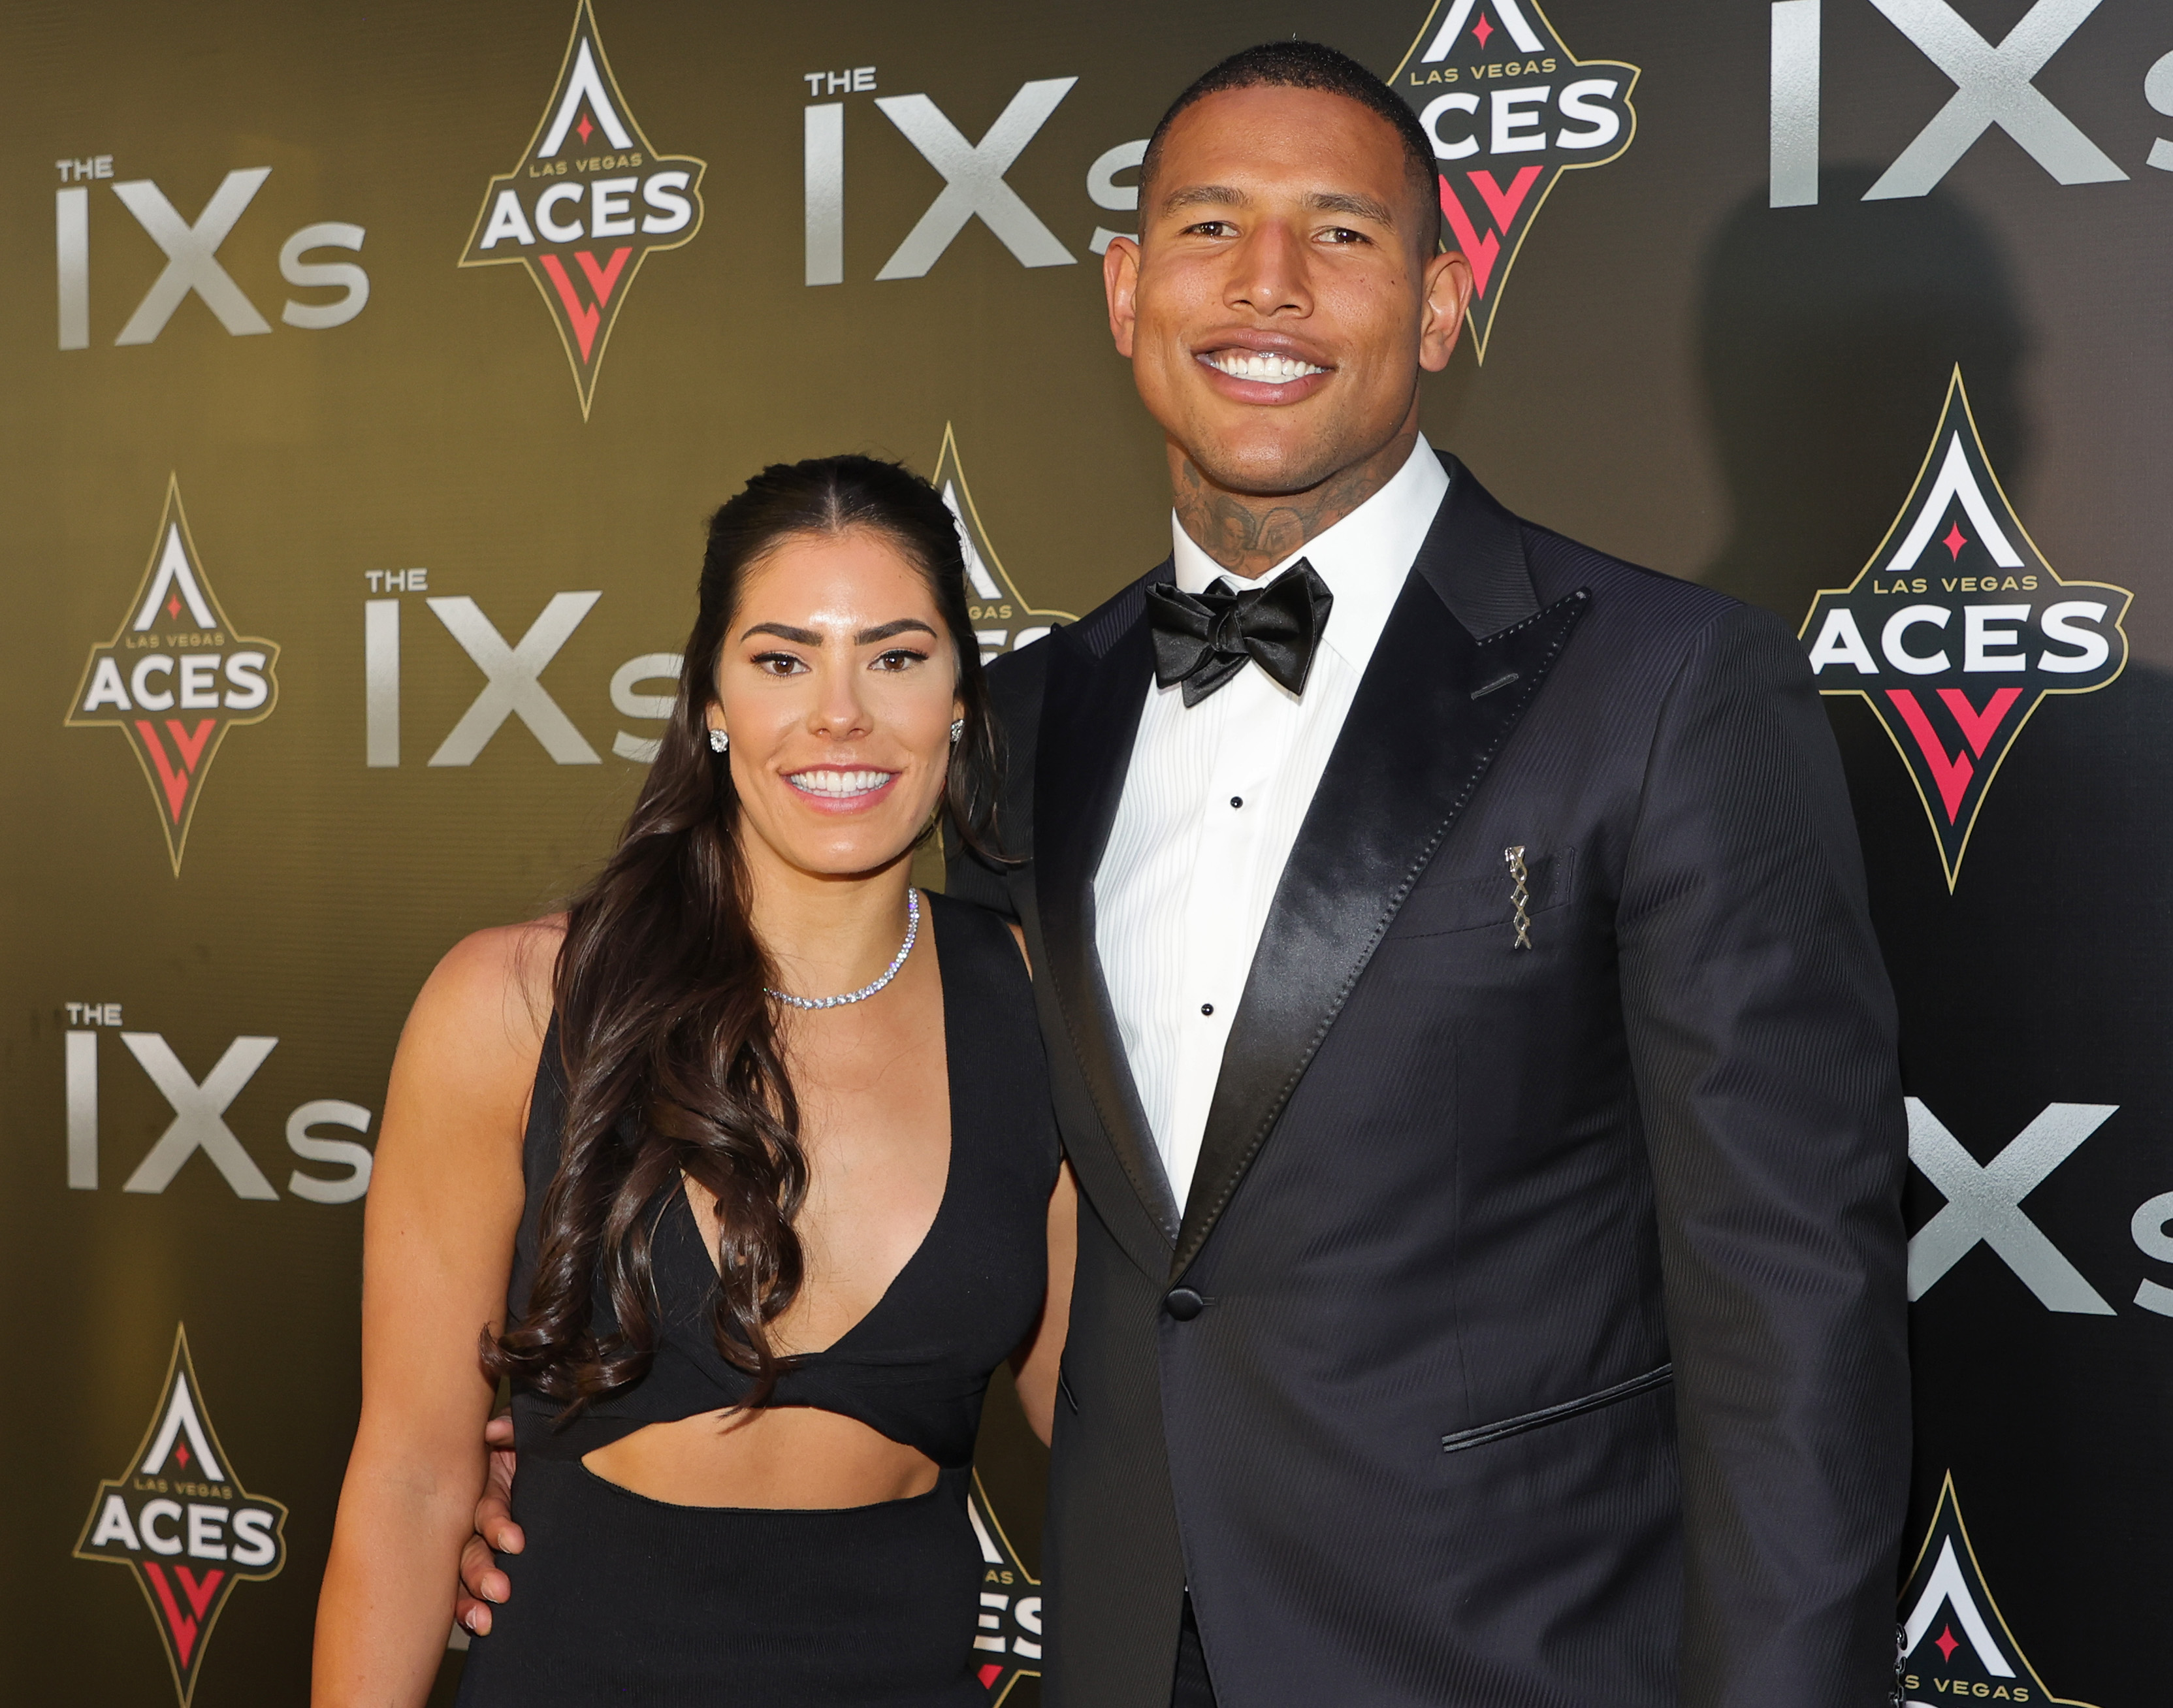 WNBA star Kelsey Plum and Giants' Darren Waller file for divorce after
1 year of marriage